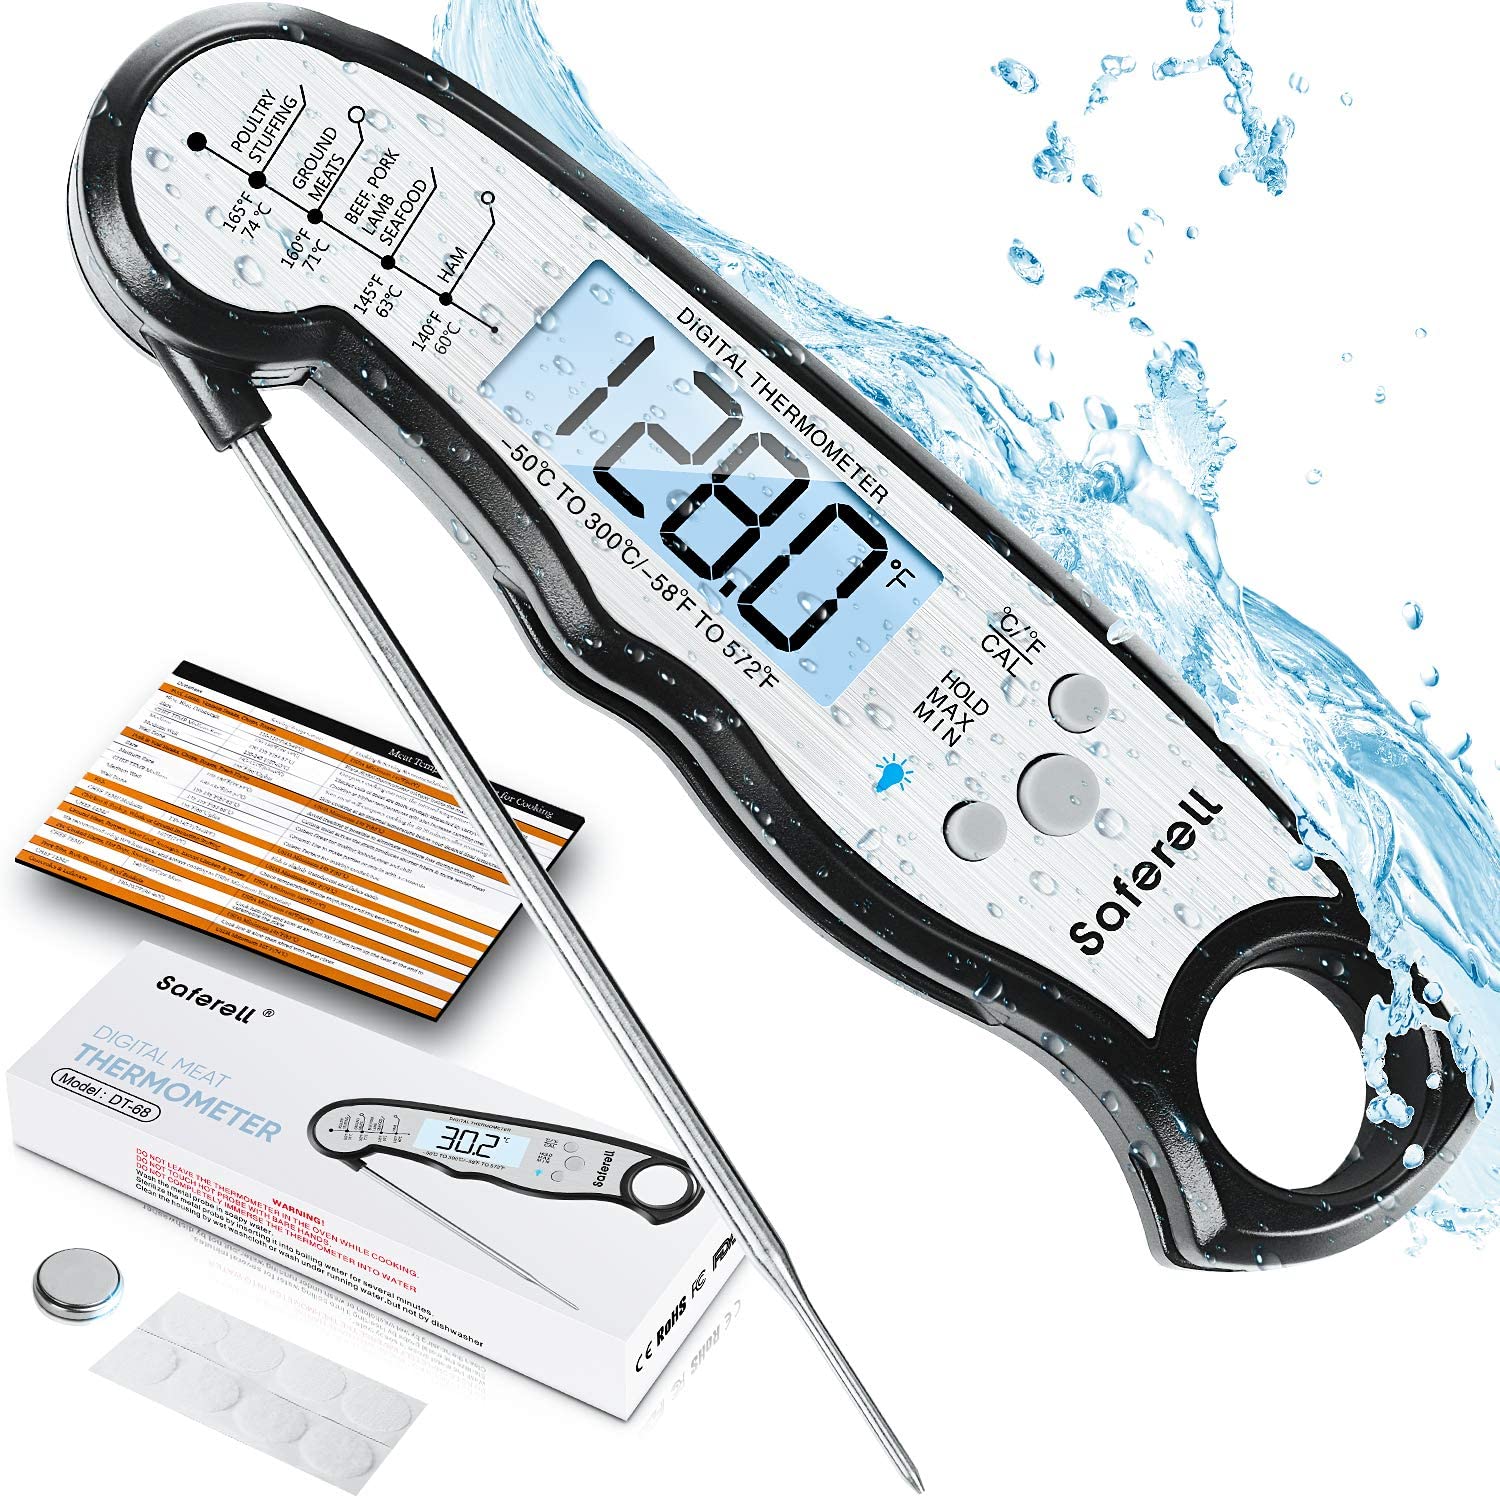 https://www.dontwasteyourmoney.com/wp-content/uploads/2020/10/saferell-instant-read-meat-food-thermometer-food-thermometer.jpg